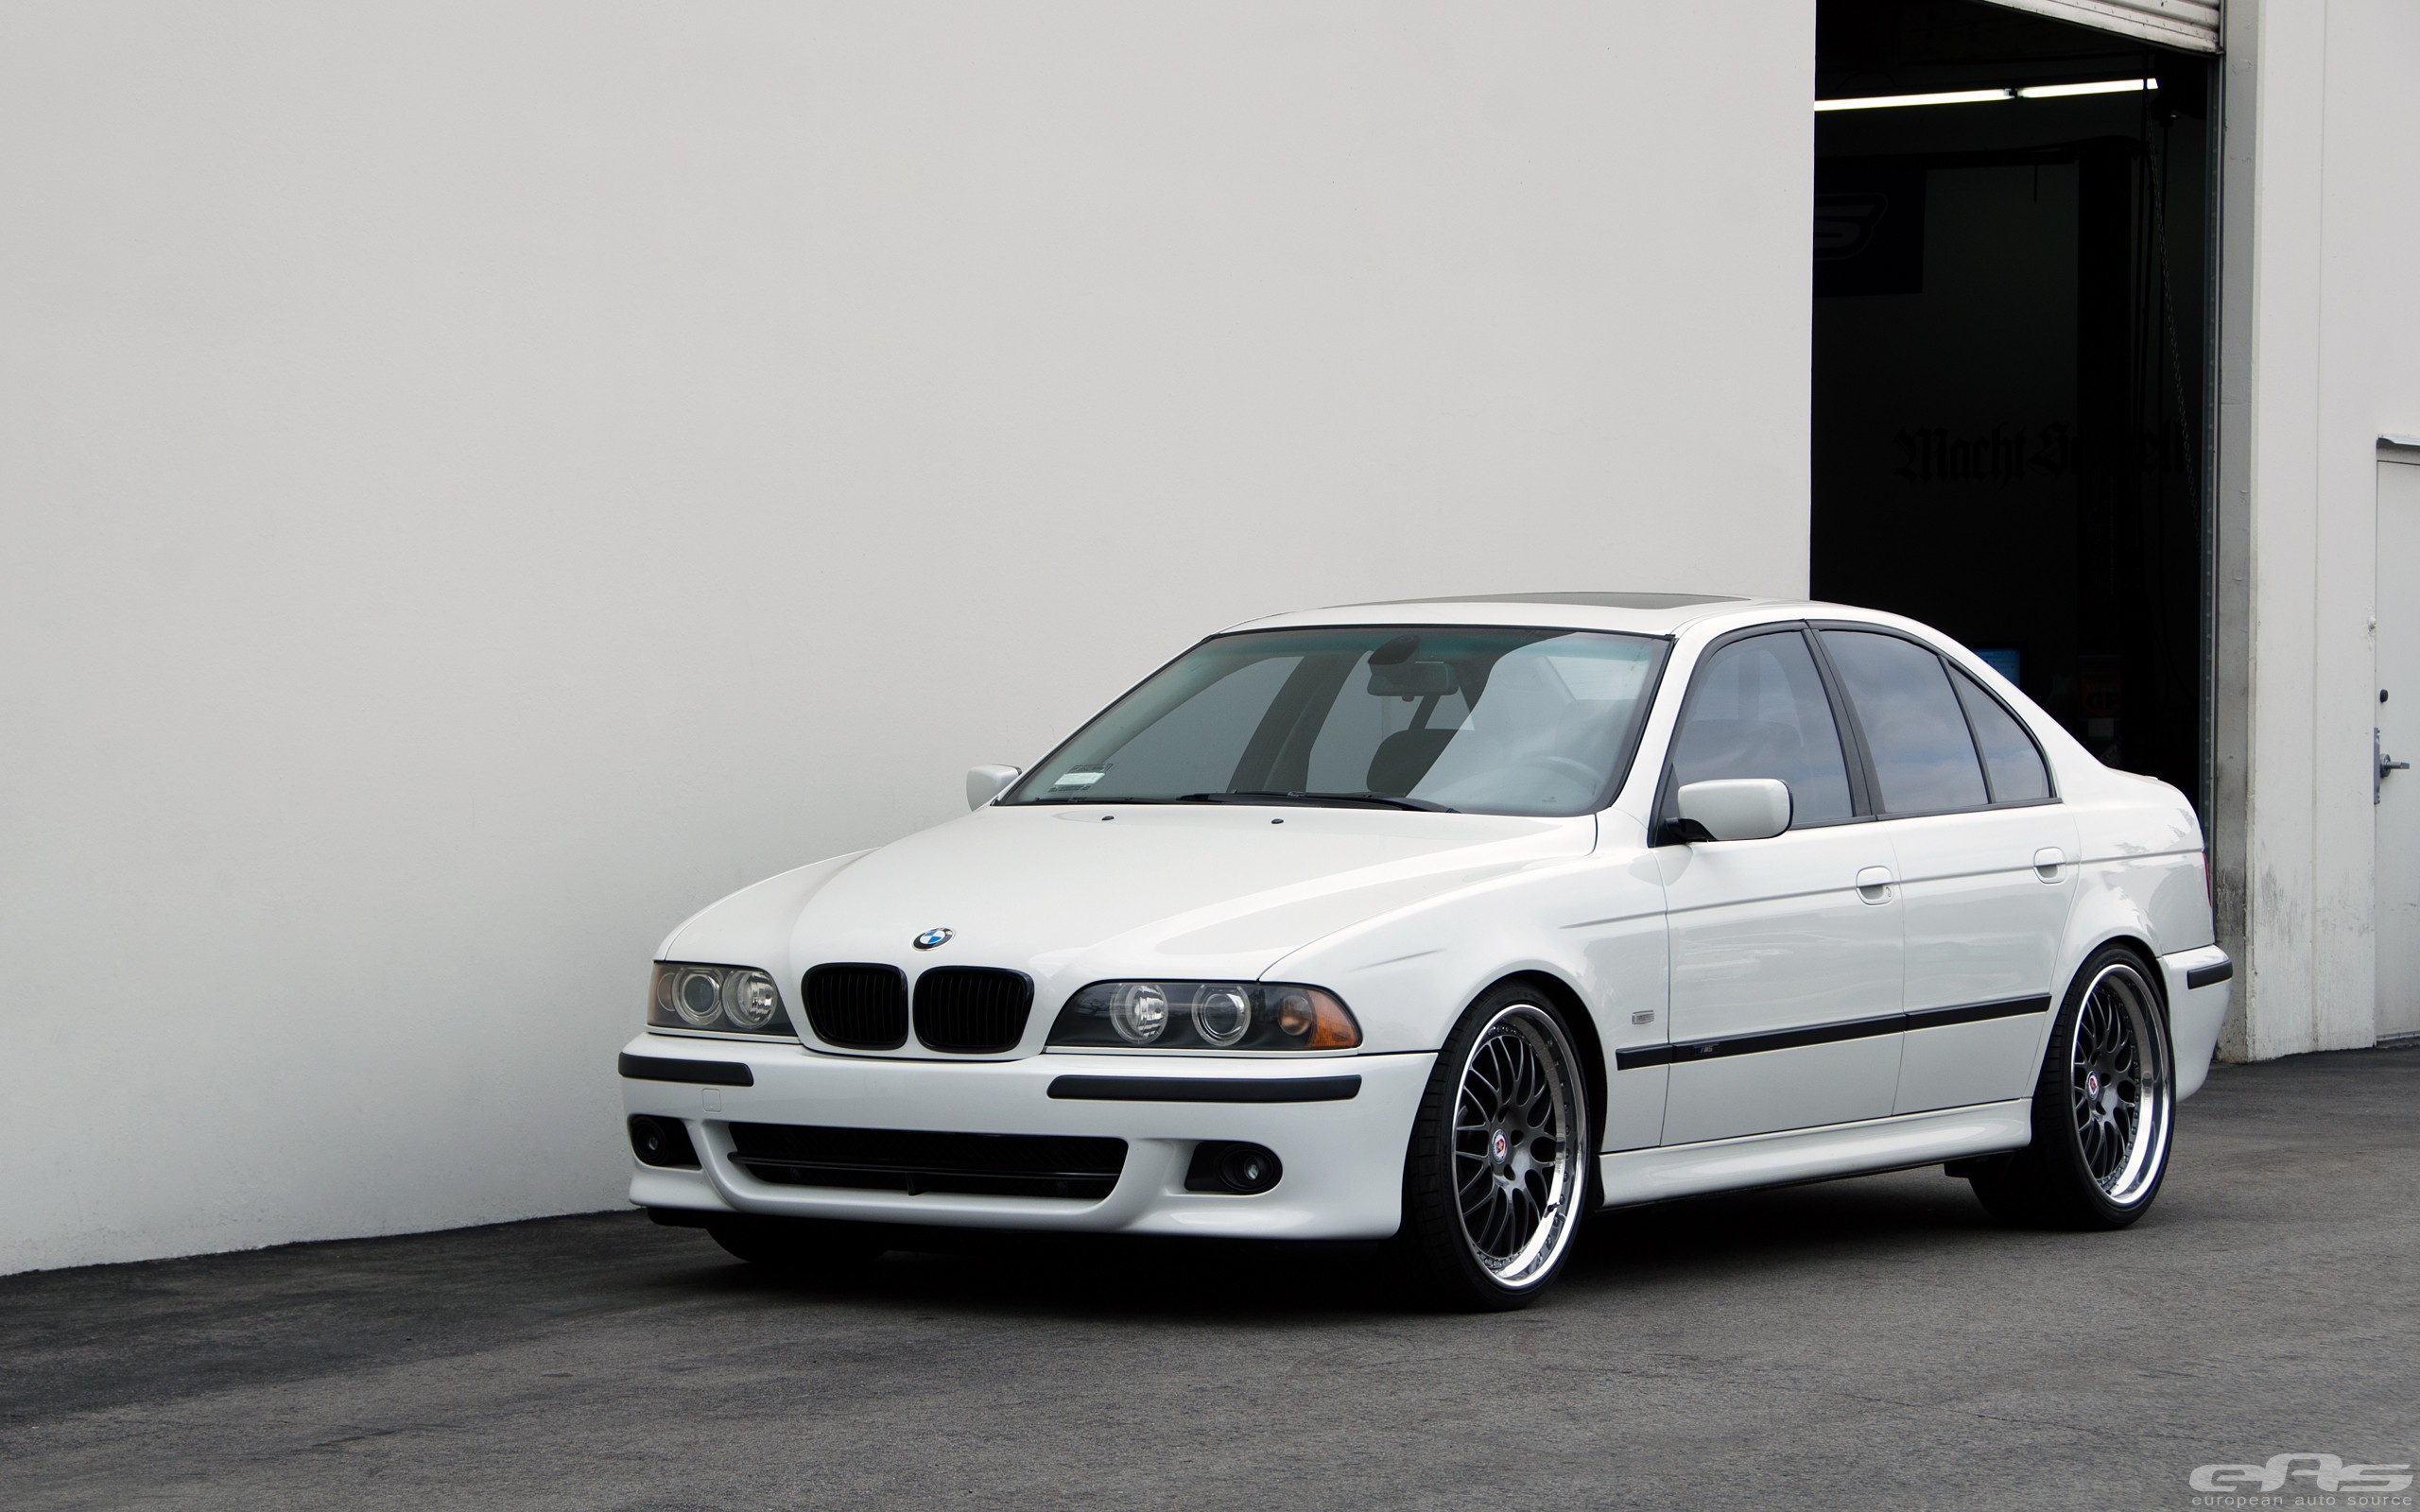 BMW E39 530i Gets Lower at EAS, Still Looks Good